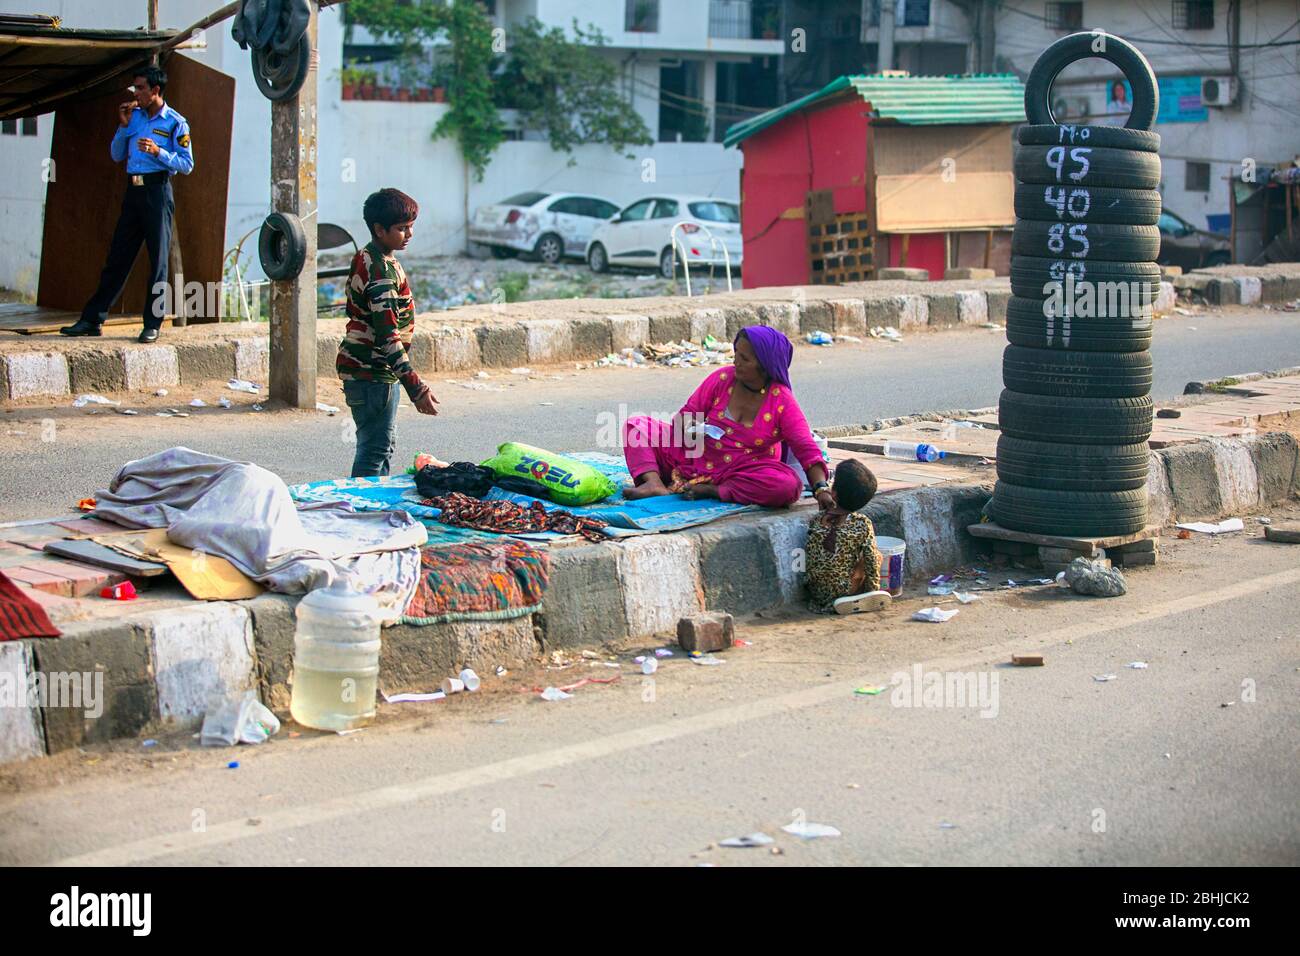 poor indian family living in the rods streets of india,poverty in india,delhi streets,indian streets,poor indian family,street kids in india,asia Stock Photo